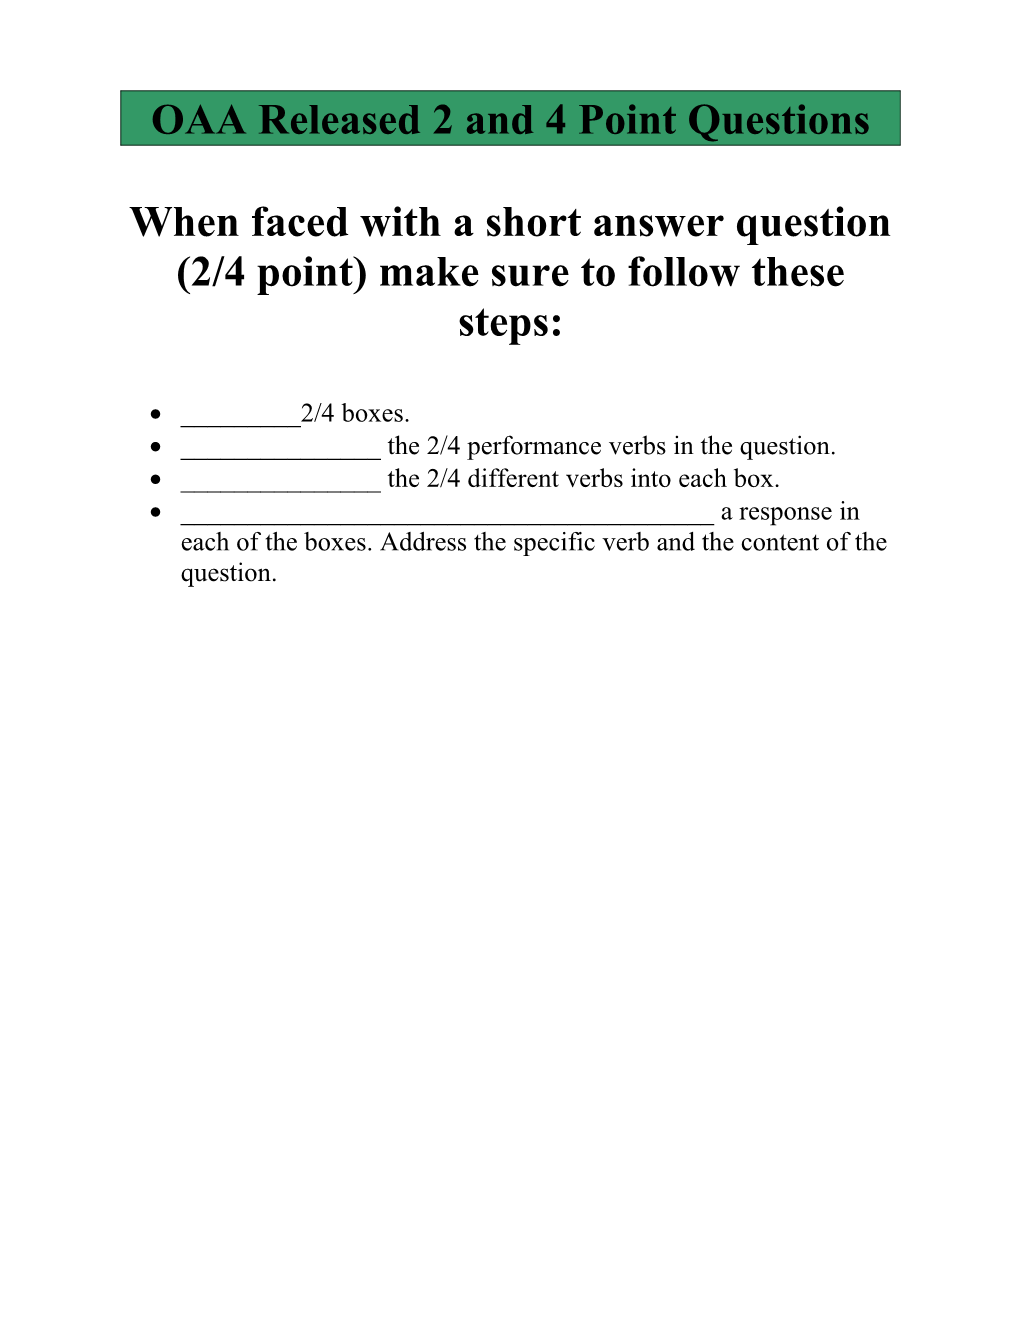 OAA Released 2 and 4 Point Questions